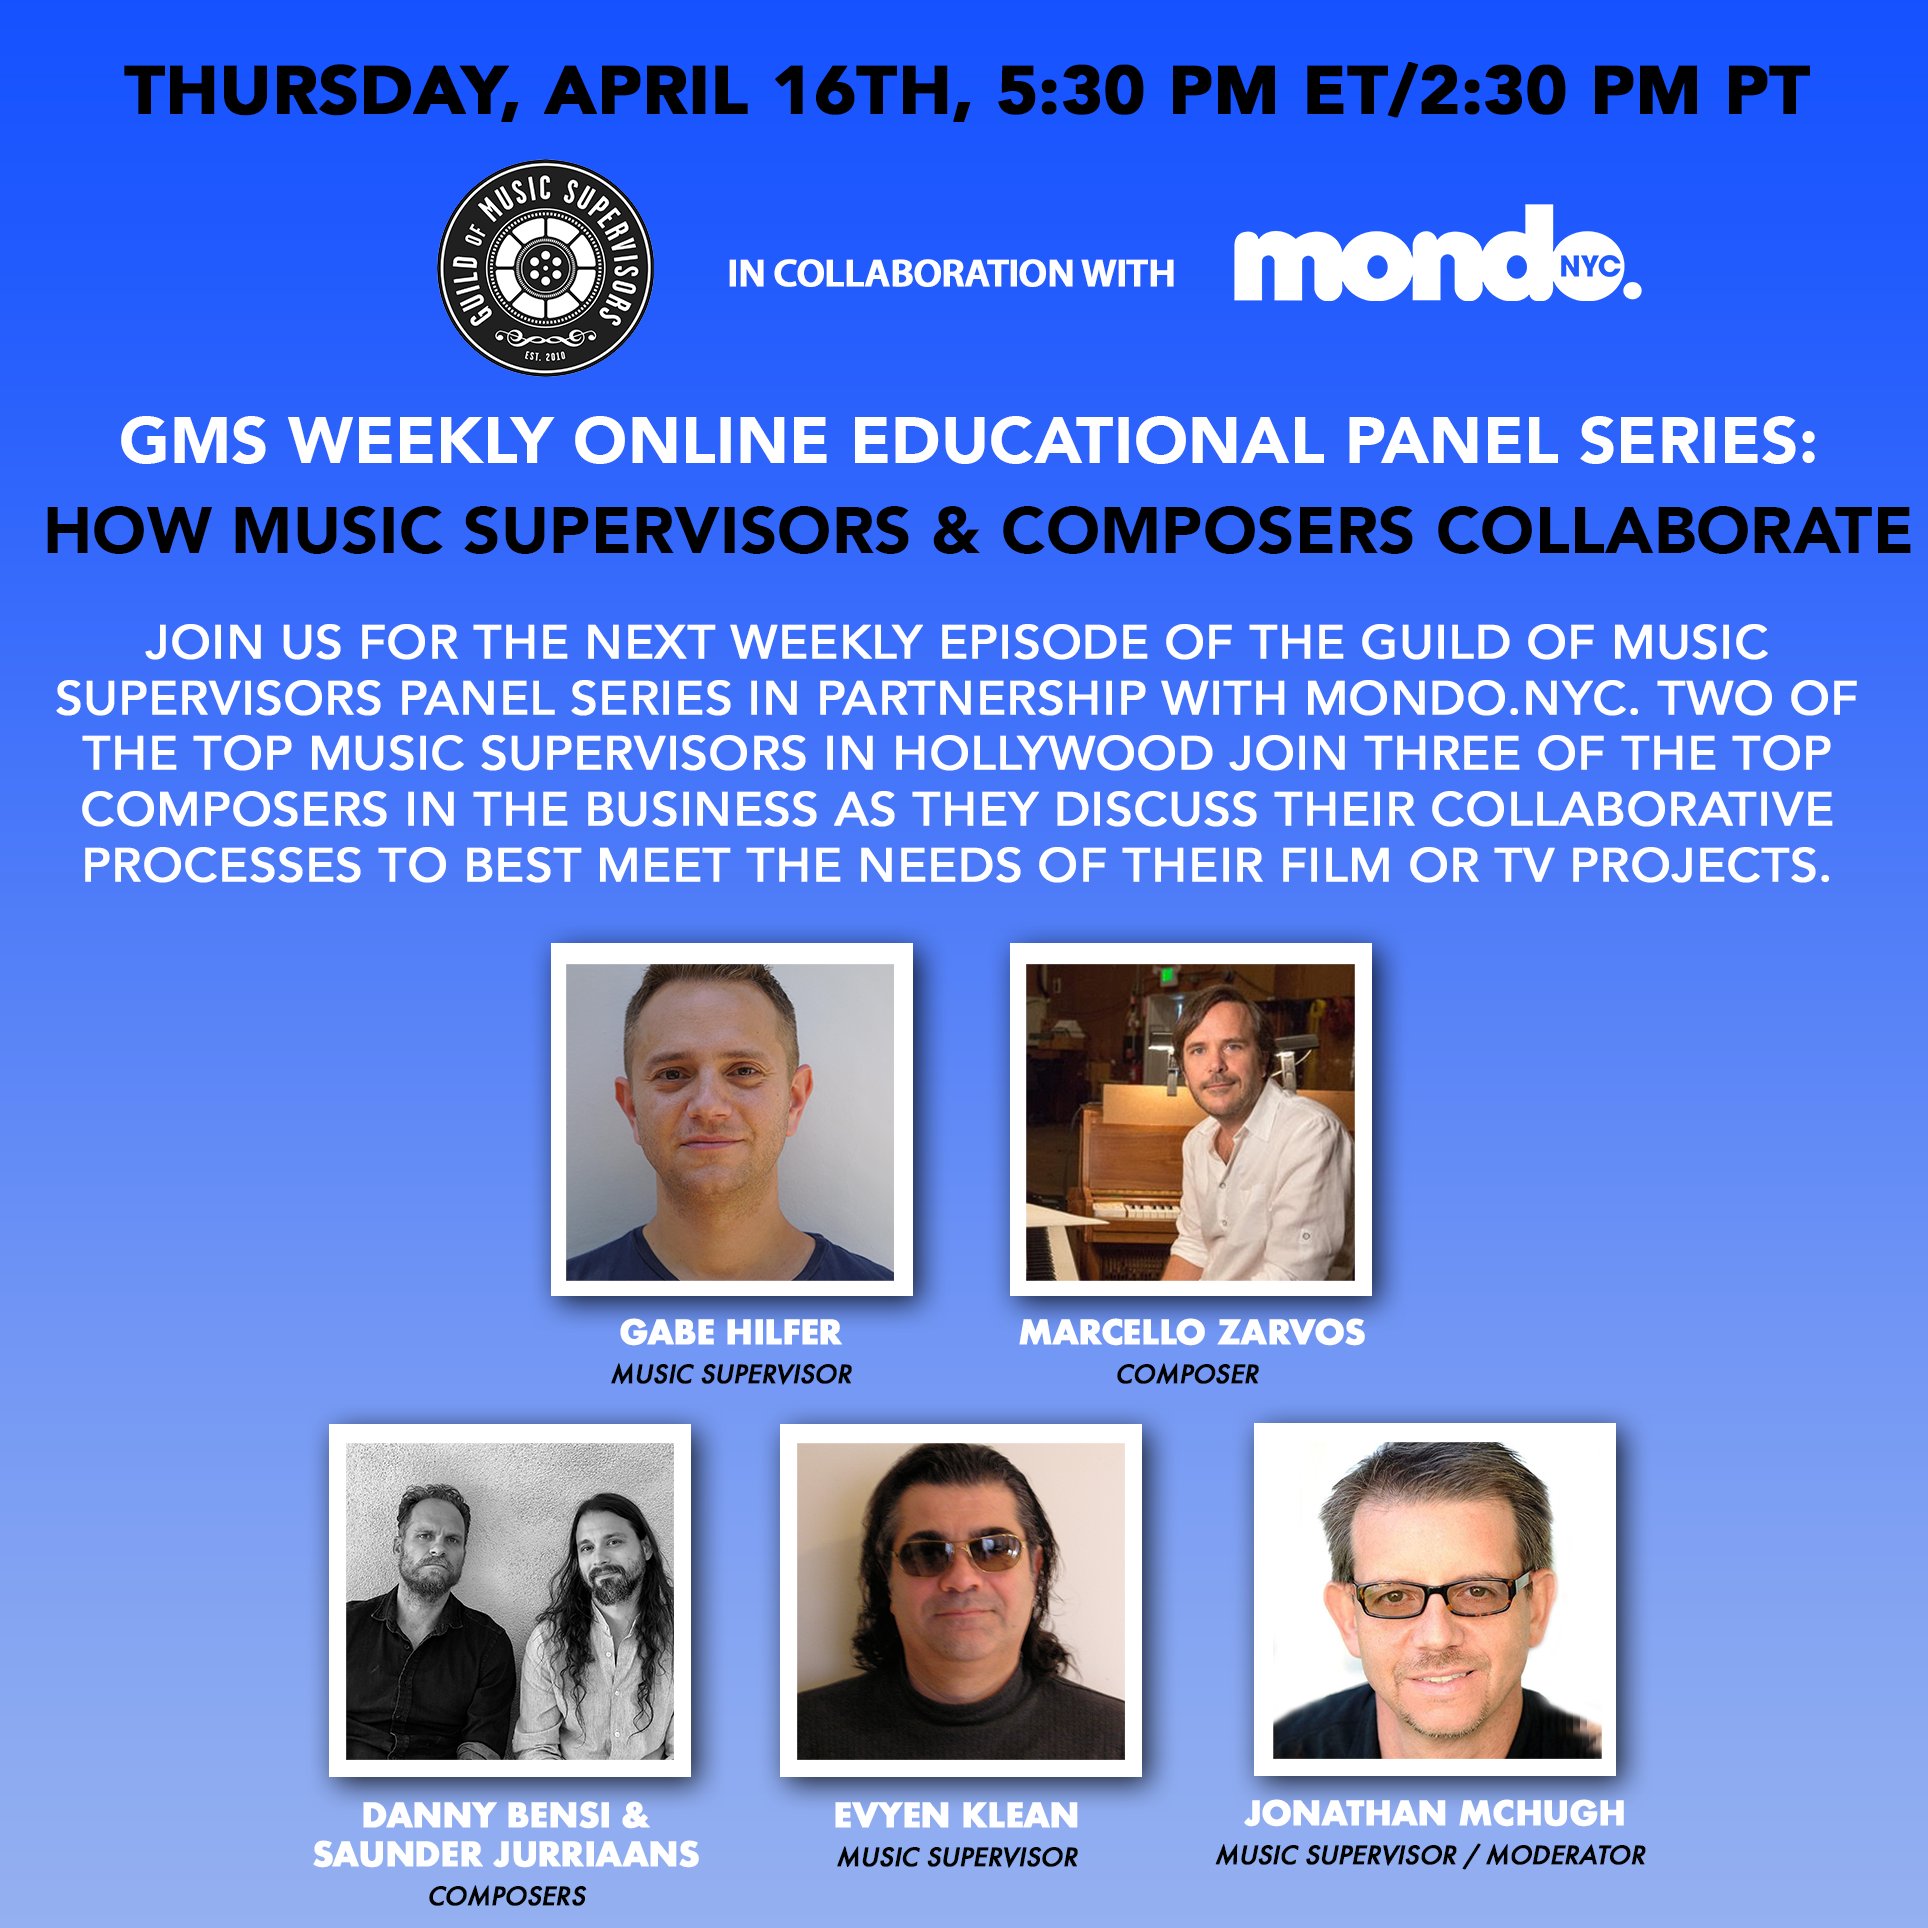 GMS Weekly Online Educational Panel Series in Collaboration with Mondo